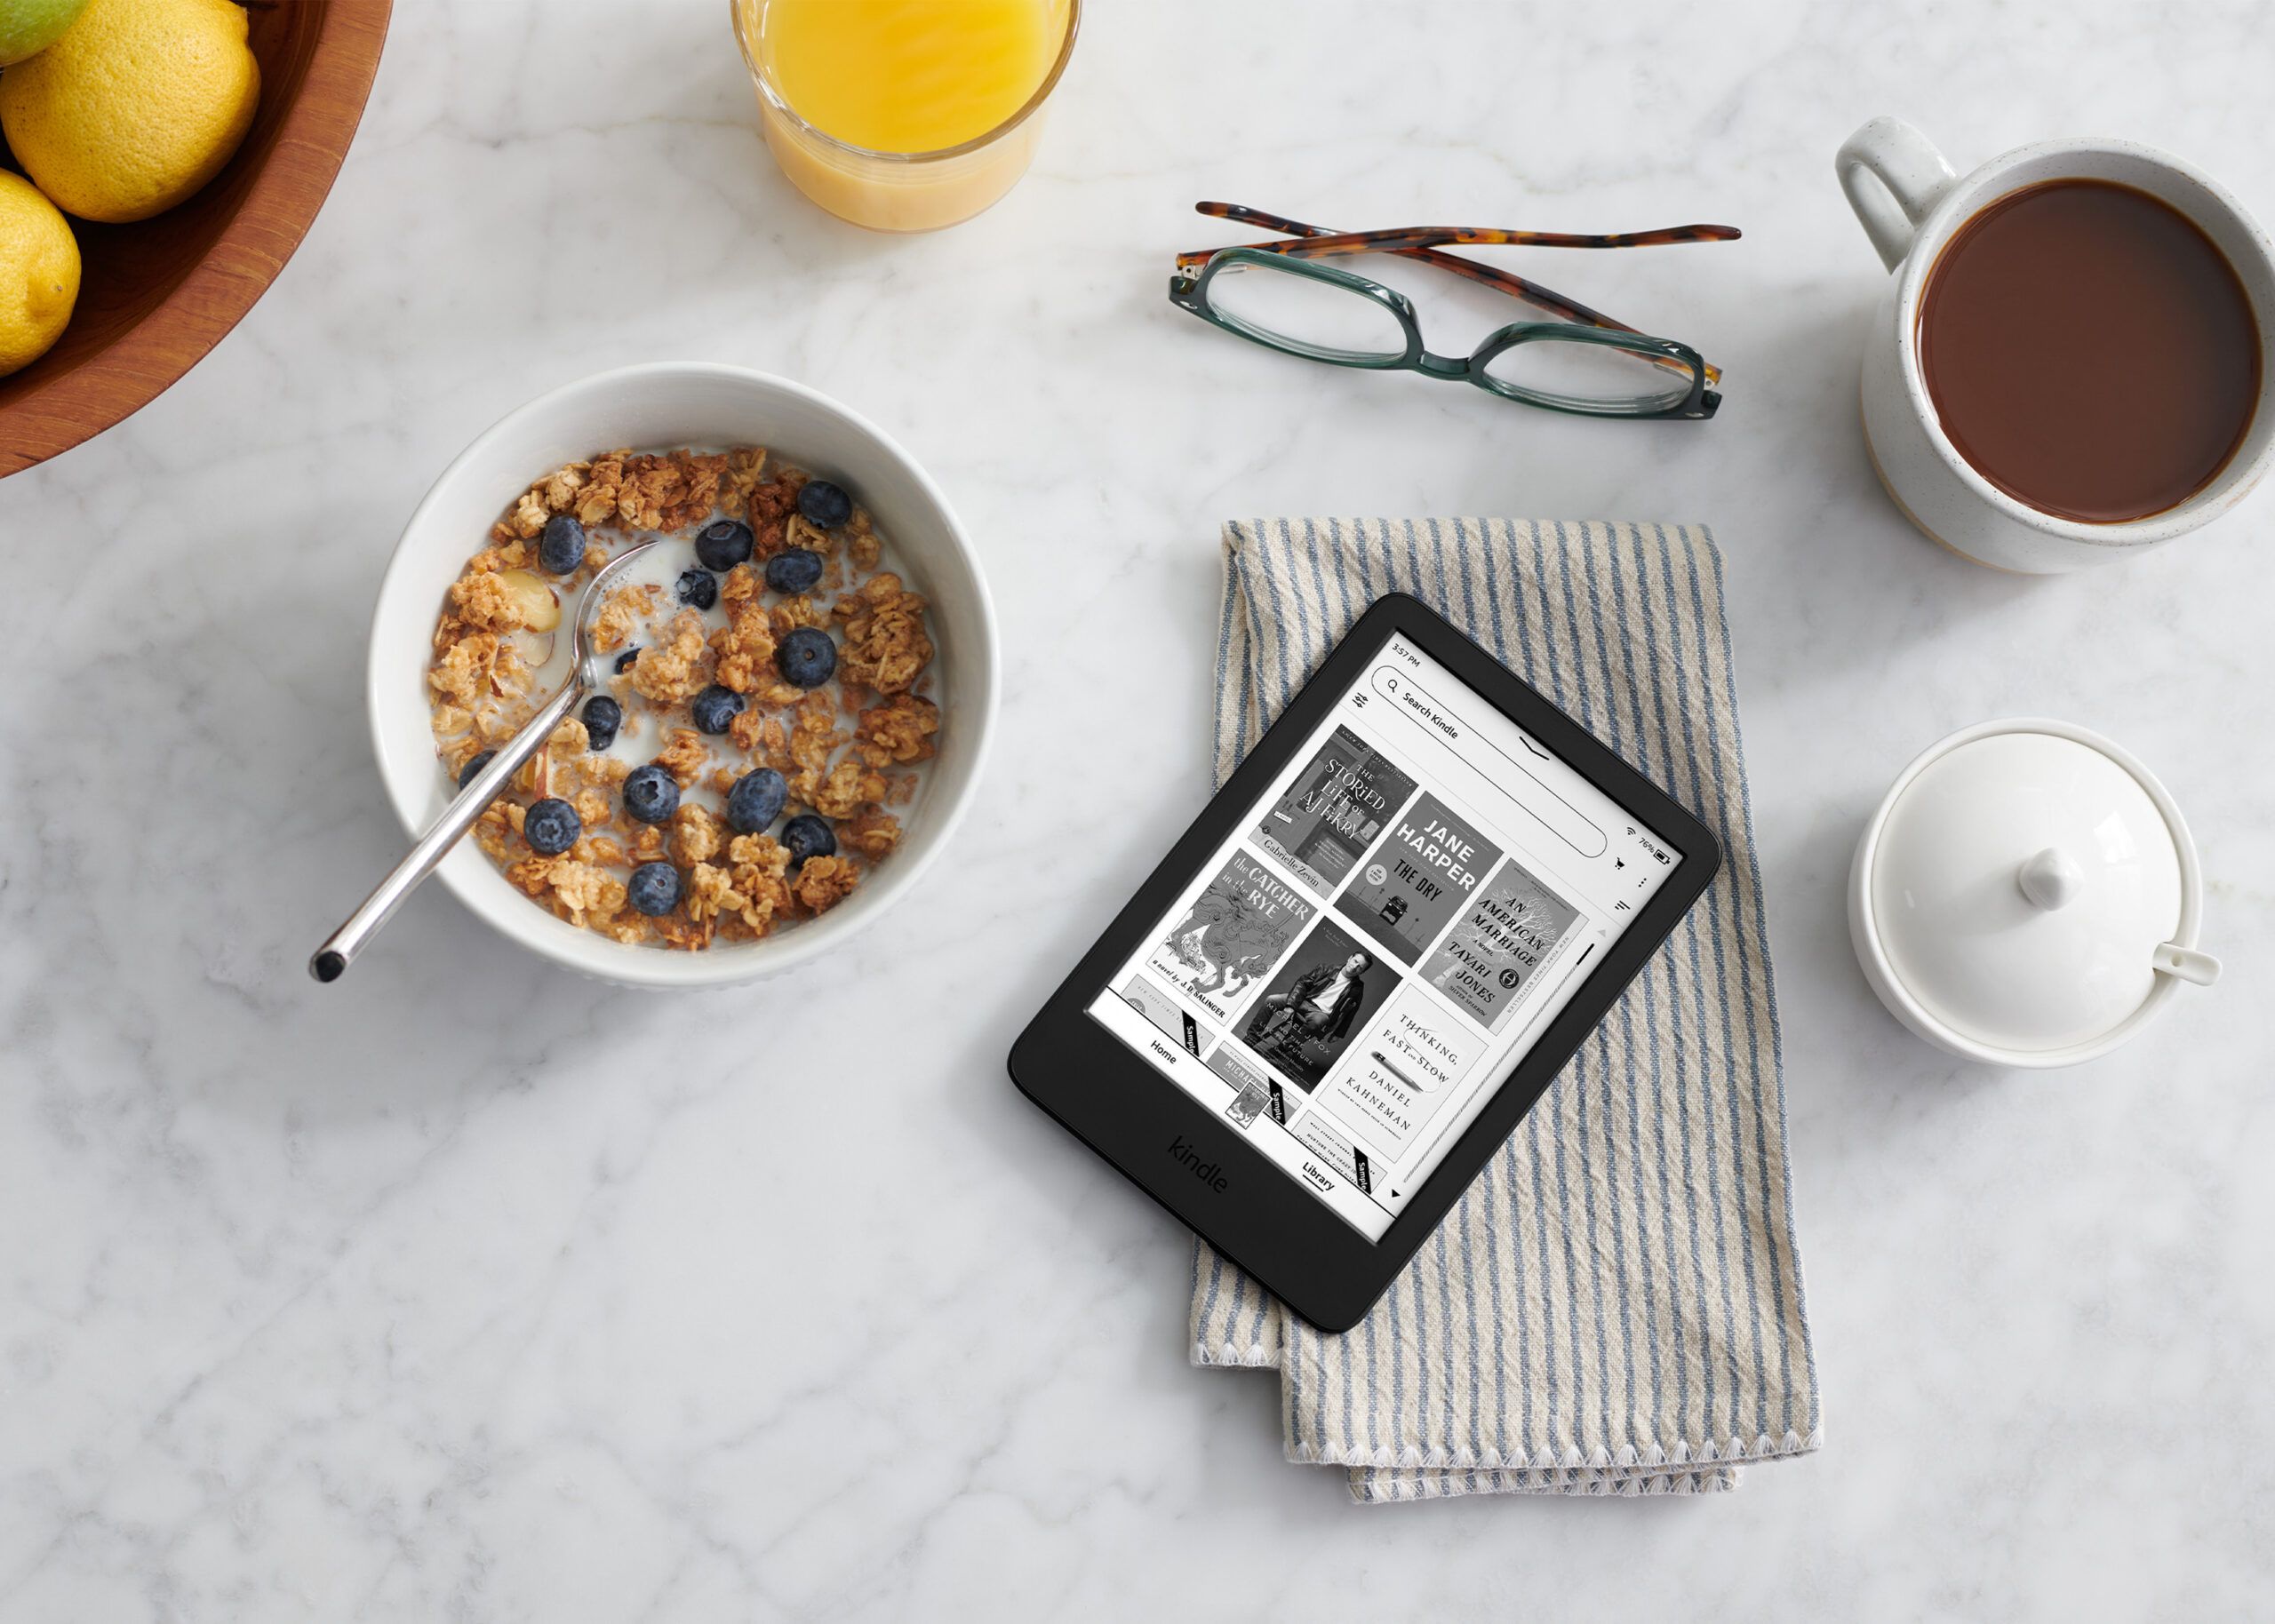 kindle press image of a kindle laying next to a breakfast scene